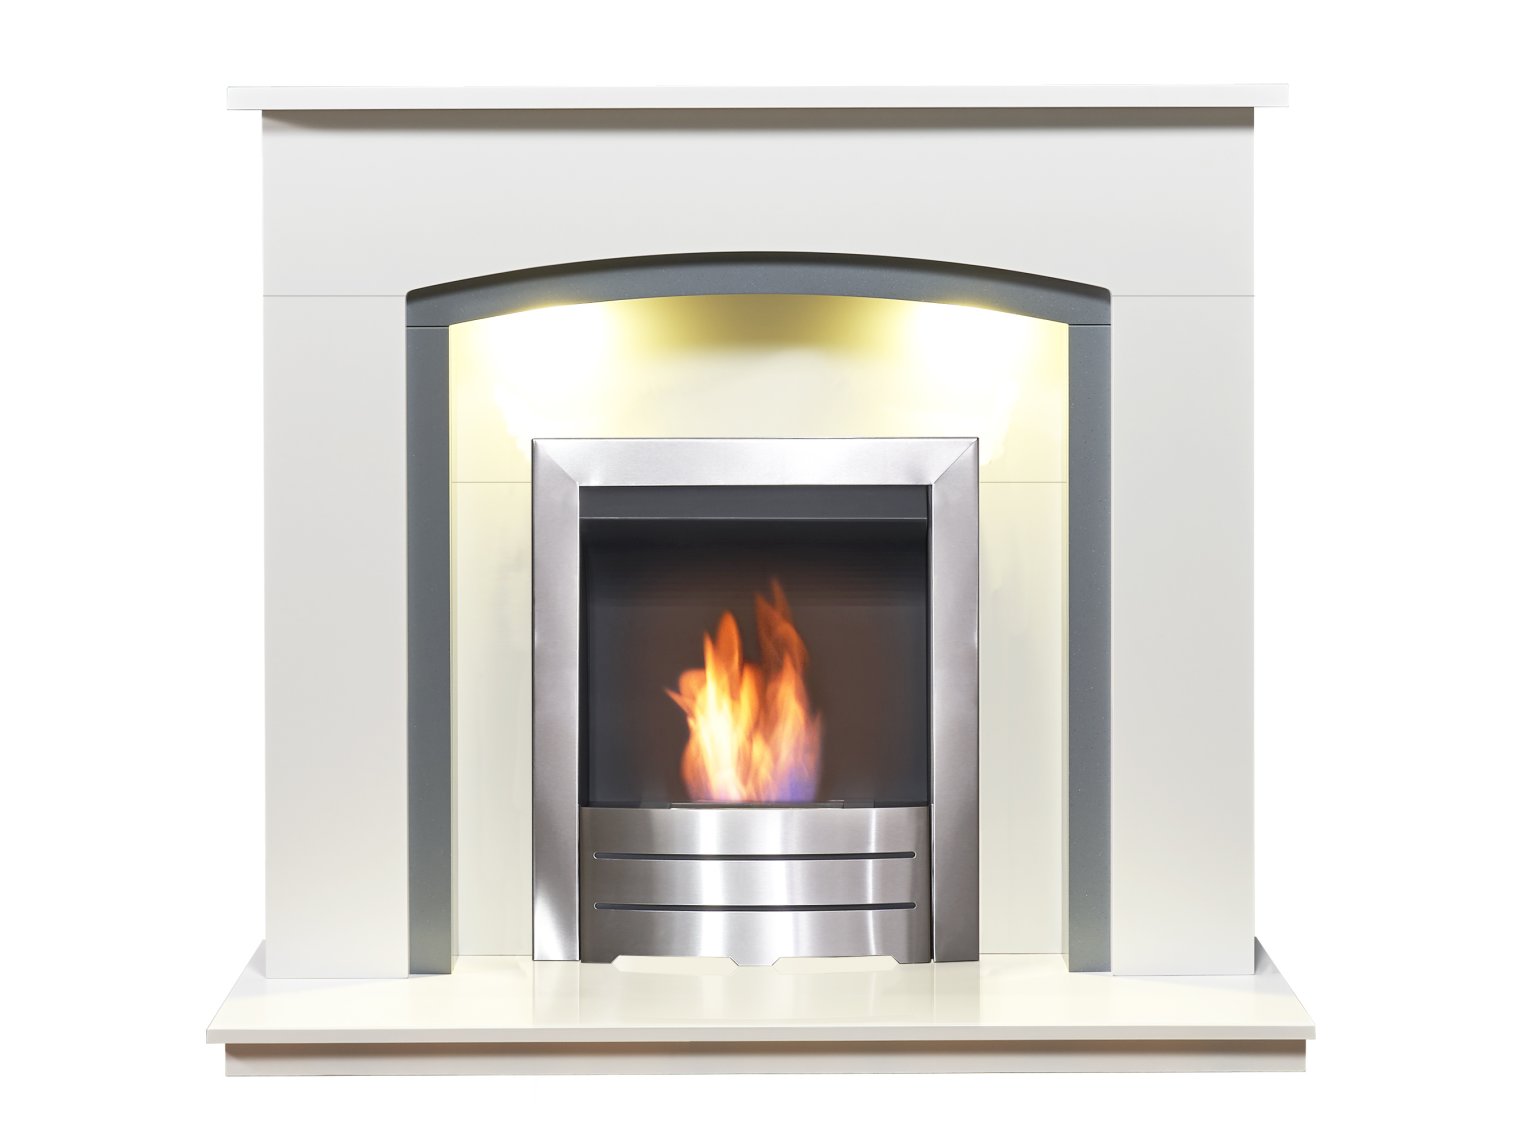 Adam Tuscany Fireplace in Pure White & Grey with Colorado Bio Ethanol Fire in Brushed Steel, 48 Inch